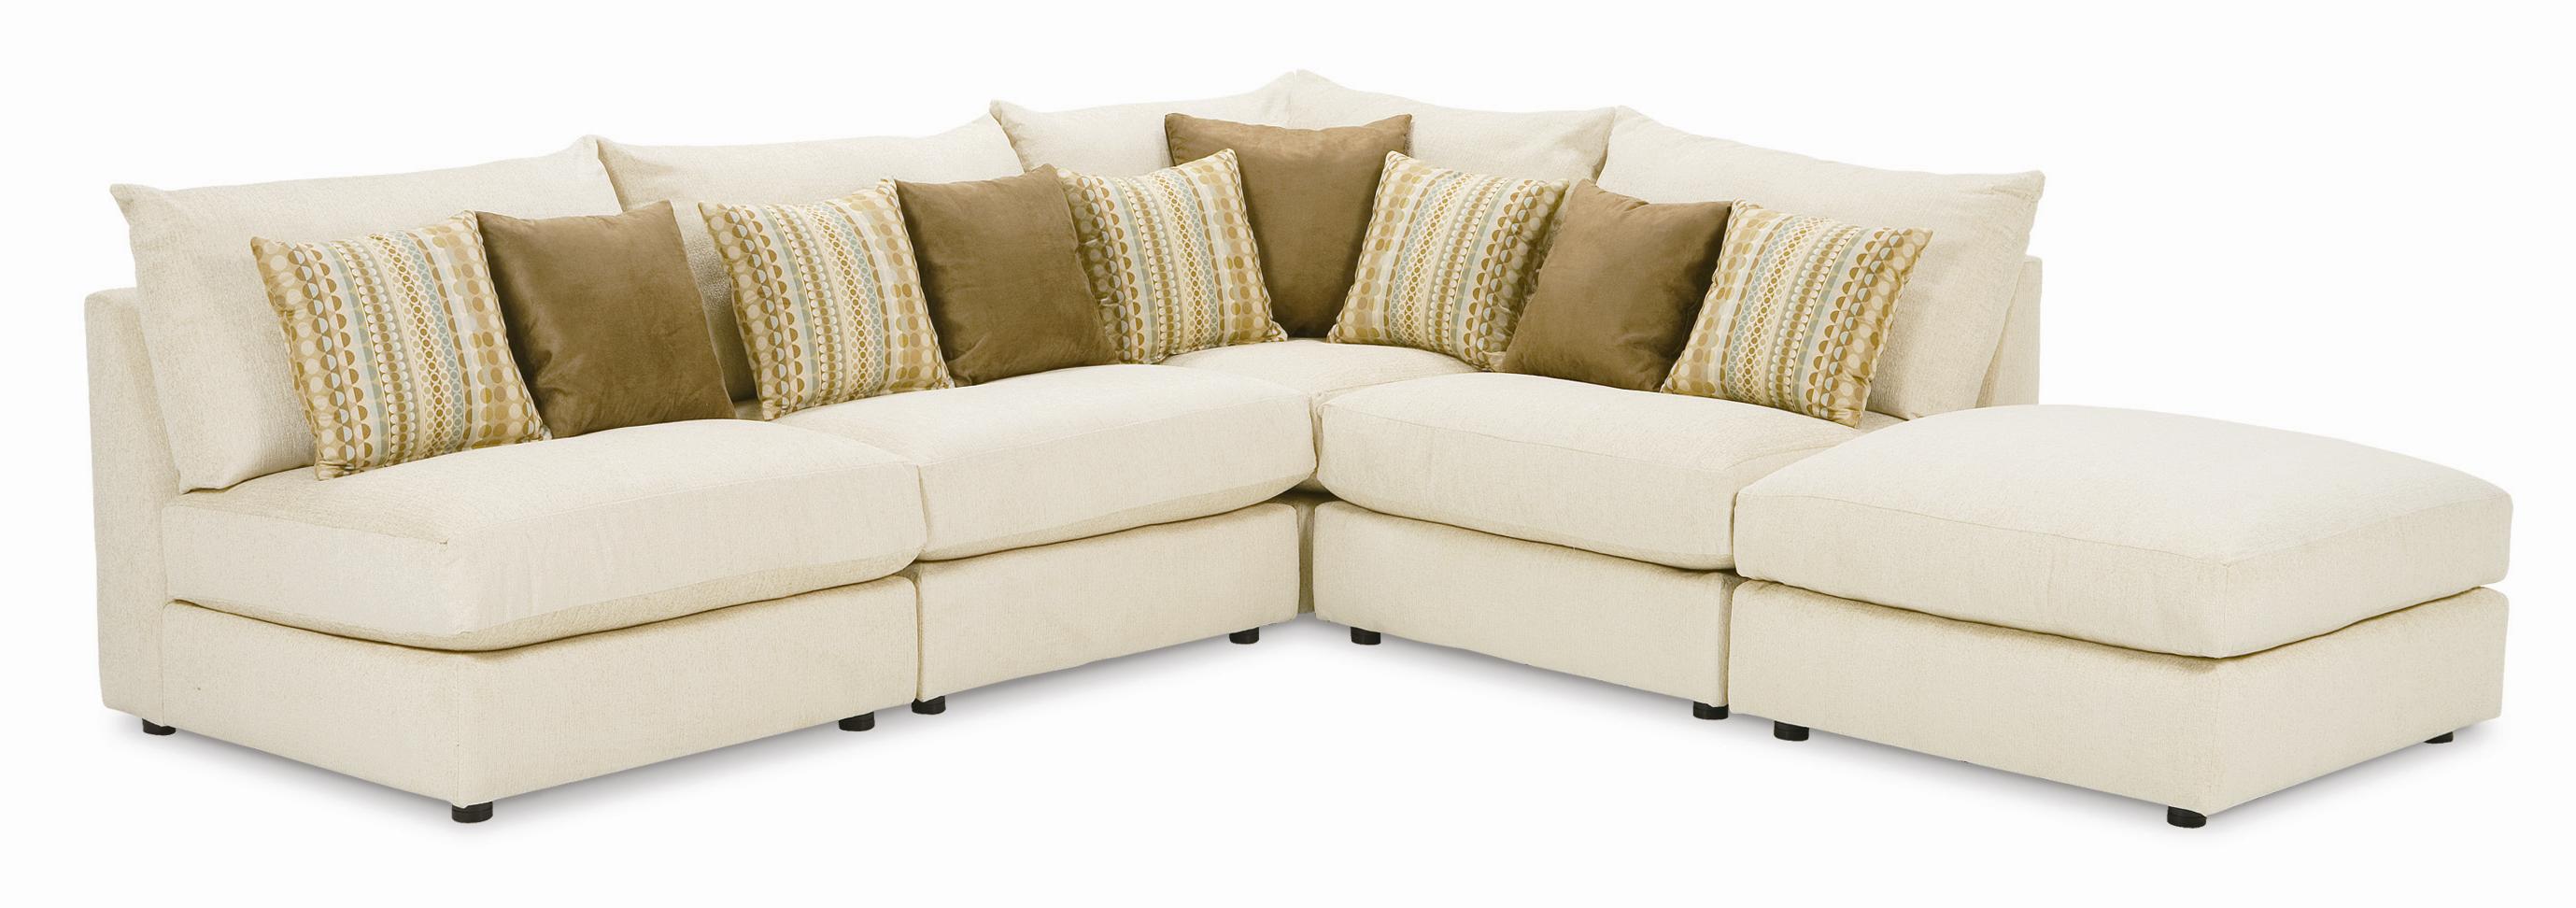 Tempo Five Piece Armless Sectional Sofa by Rowe